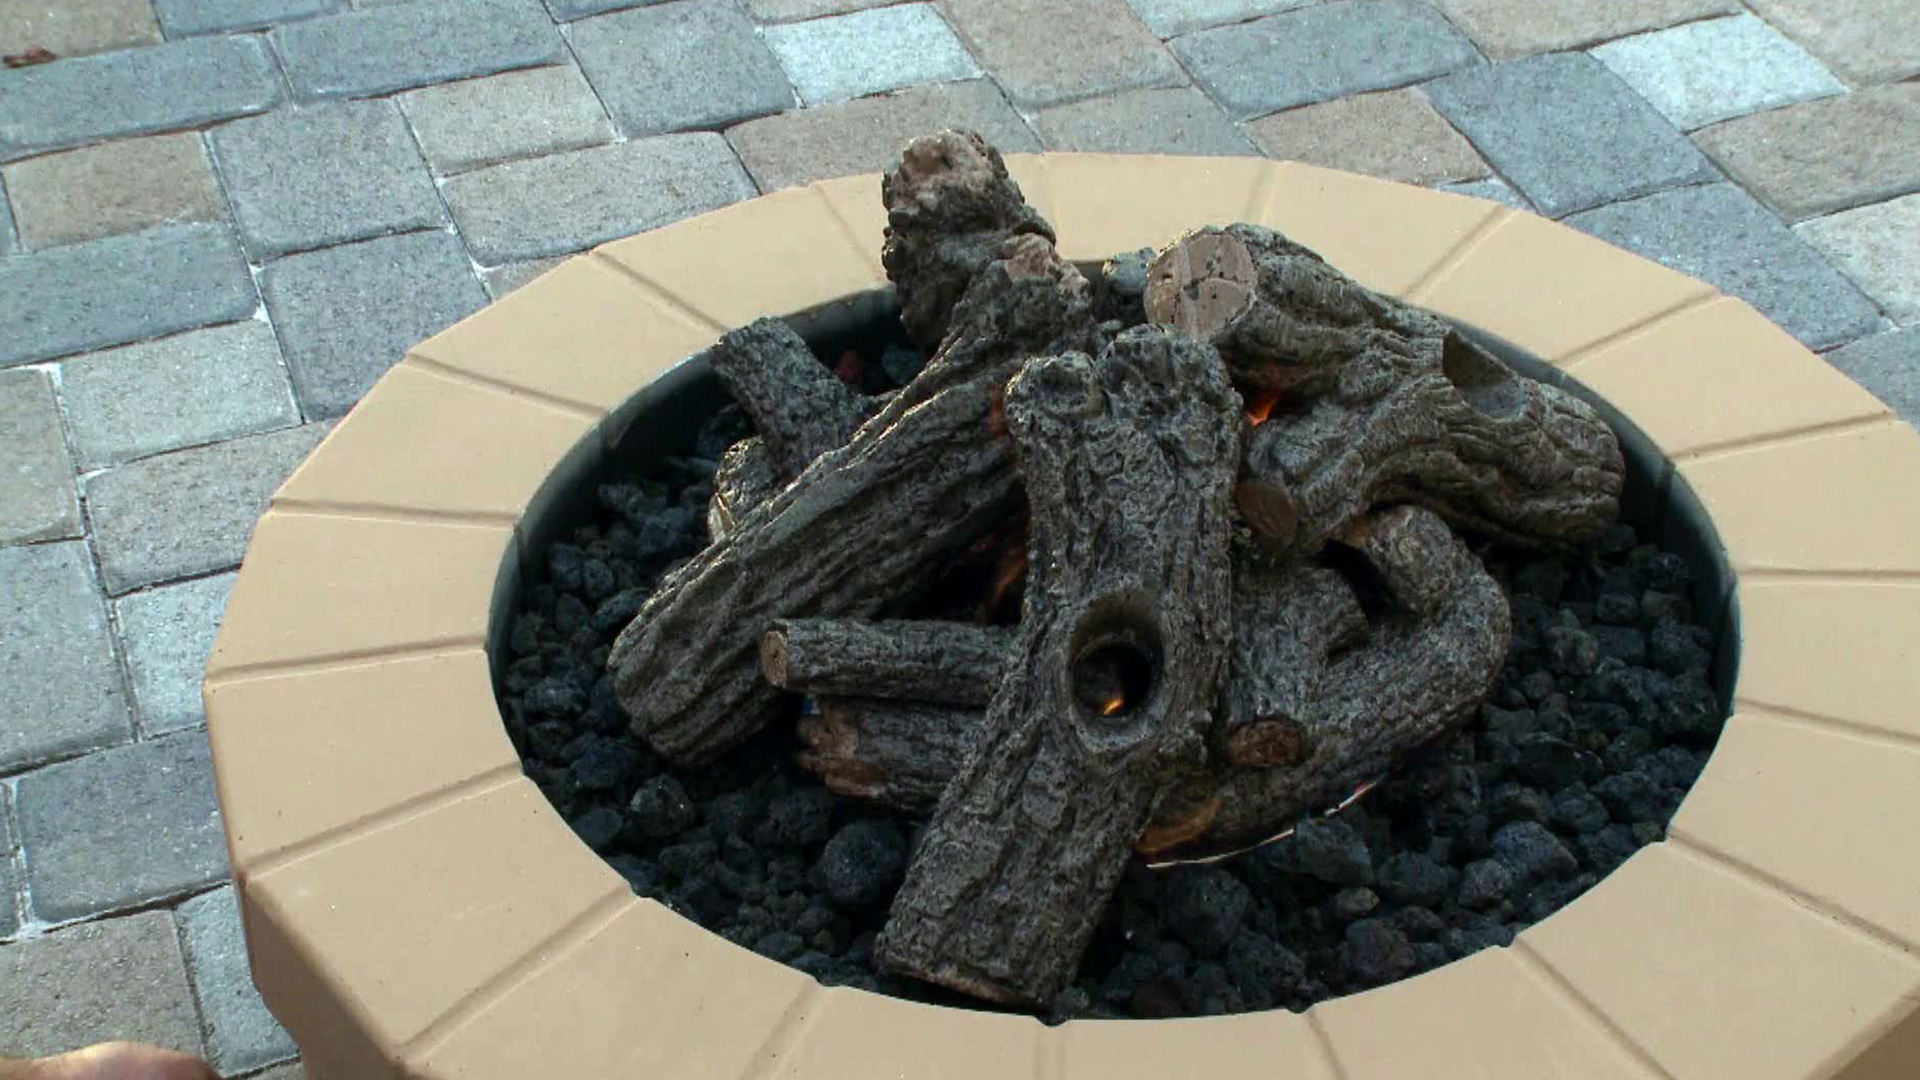 Fire Pit Material Considerations, Small Fire Pits For Apartments